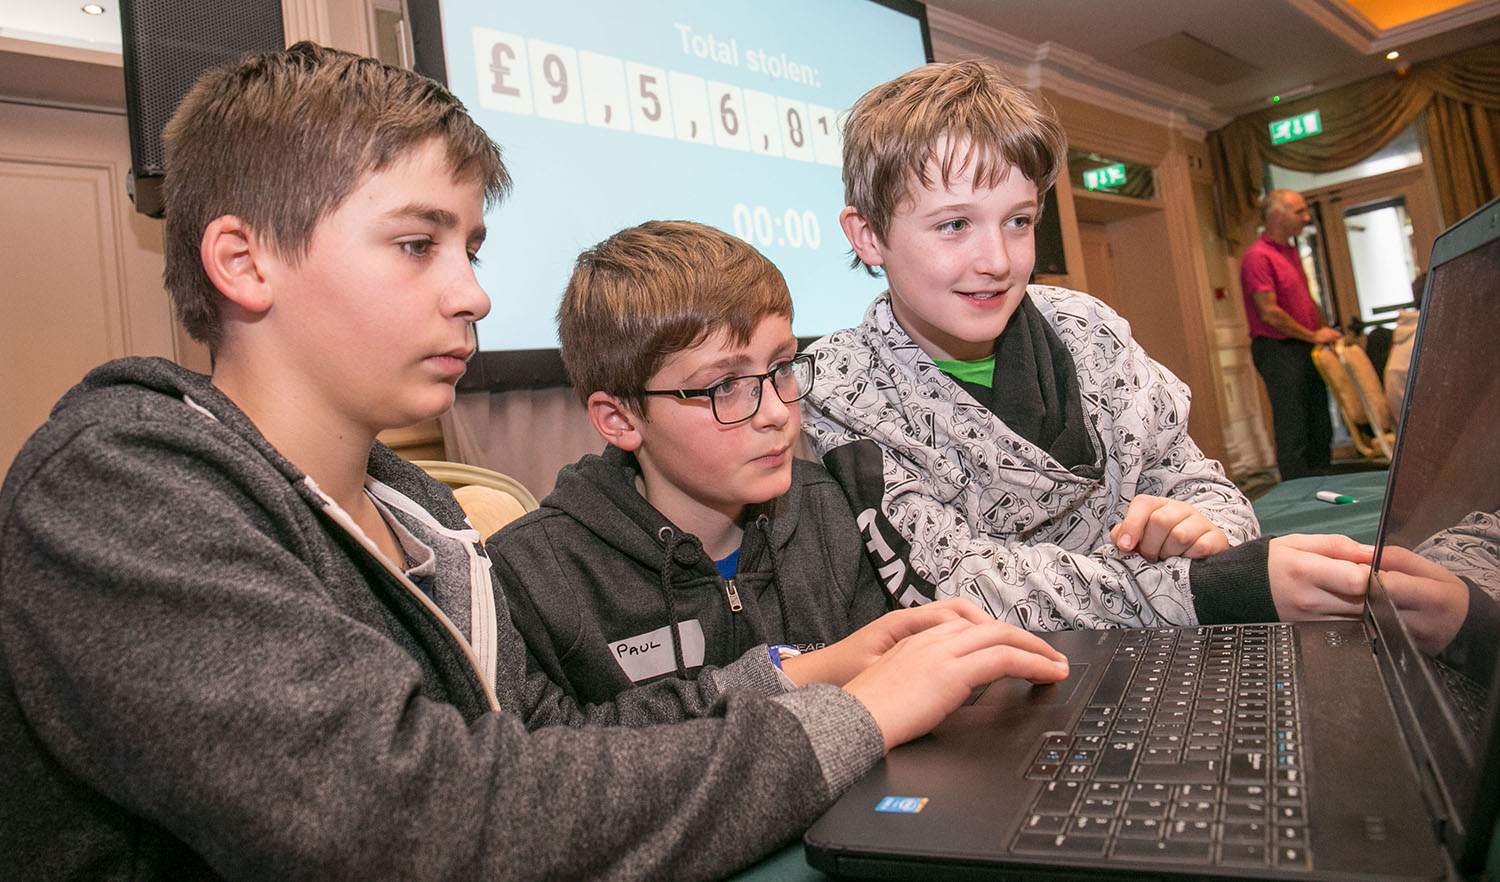 CoderDojos allow youths to explore technology and learn about computer programming, website development and app or game design in an informal, creative and social environment. (Courtesy CoderDojo)